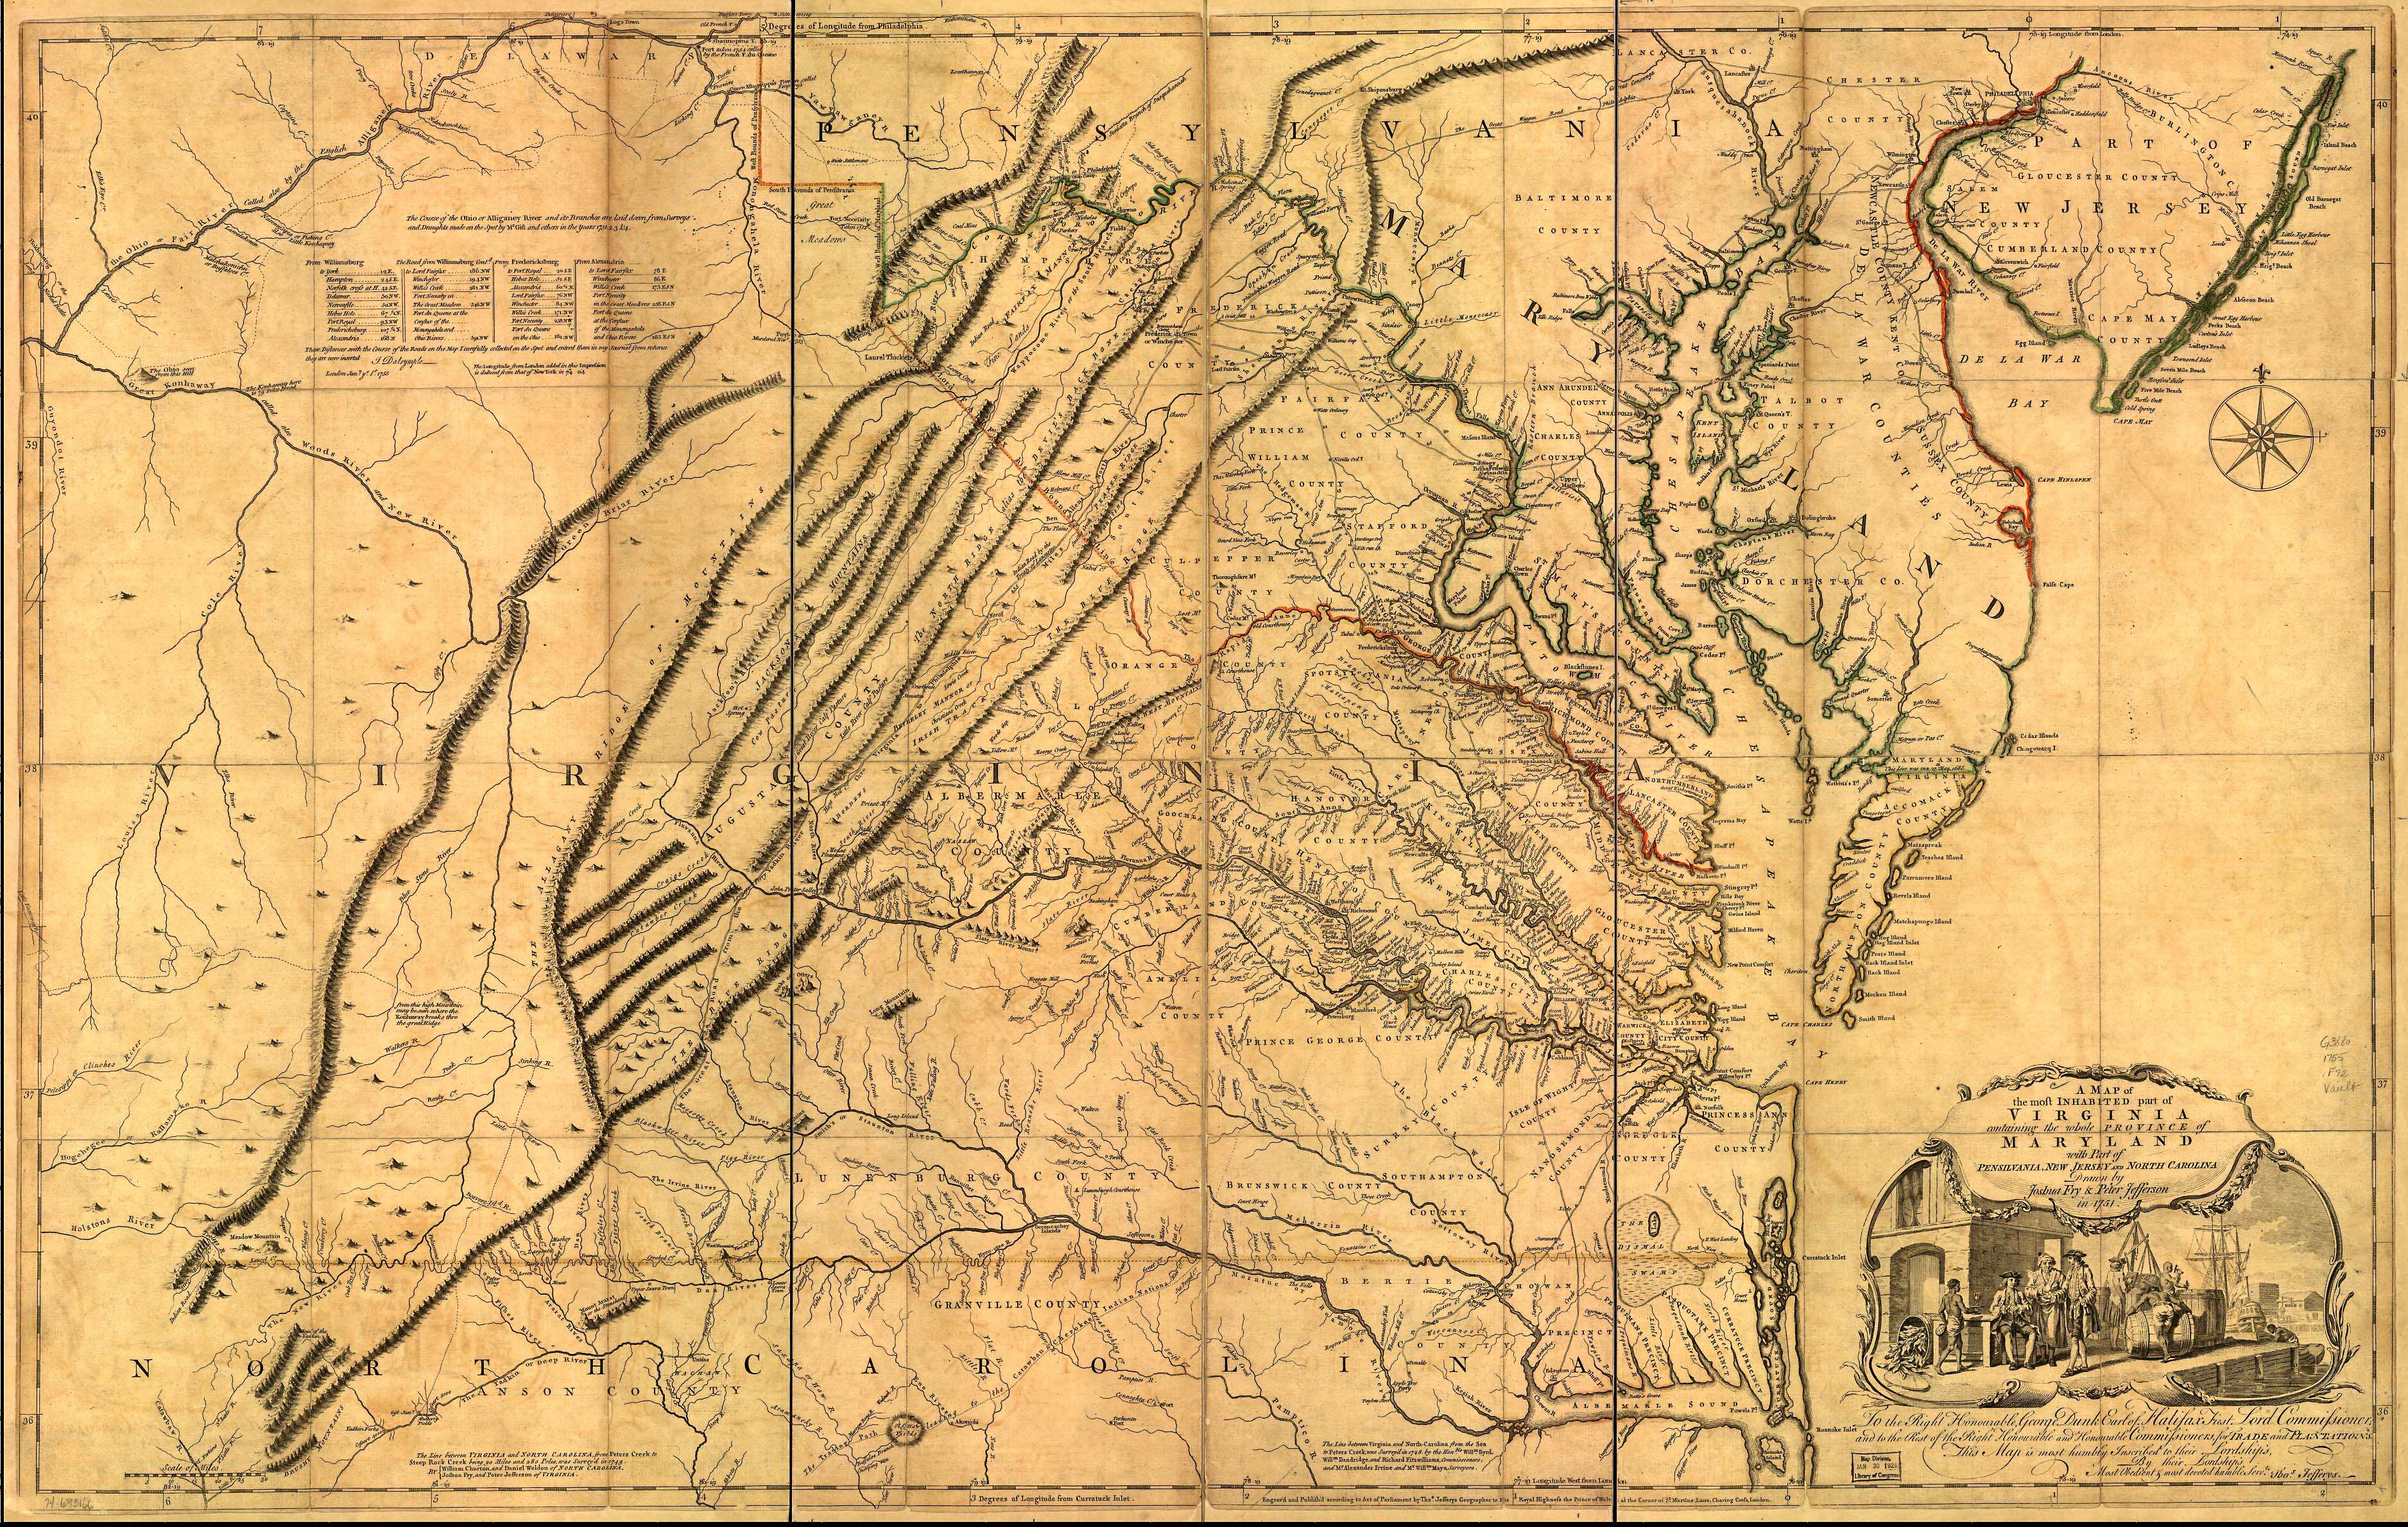 Fry-Jefferson map of Virginia, 1751, A map of the most inhabited part of Virginia containing the whole province of Maryland with part of Pensilvania, New Jersey and North Carolina